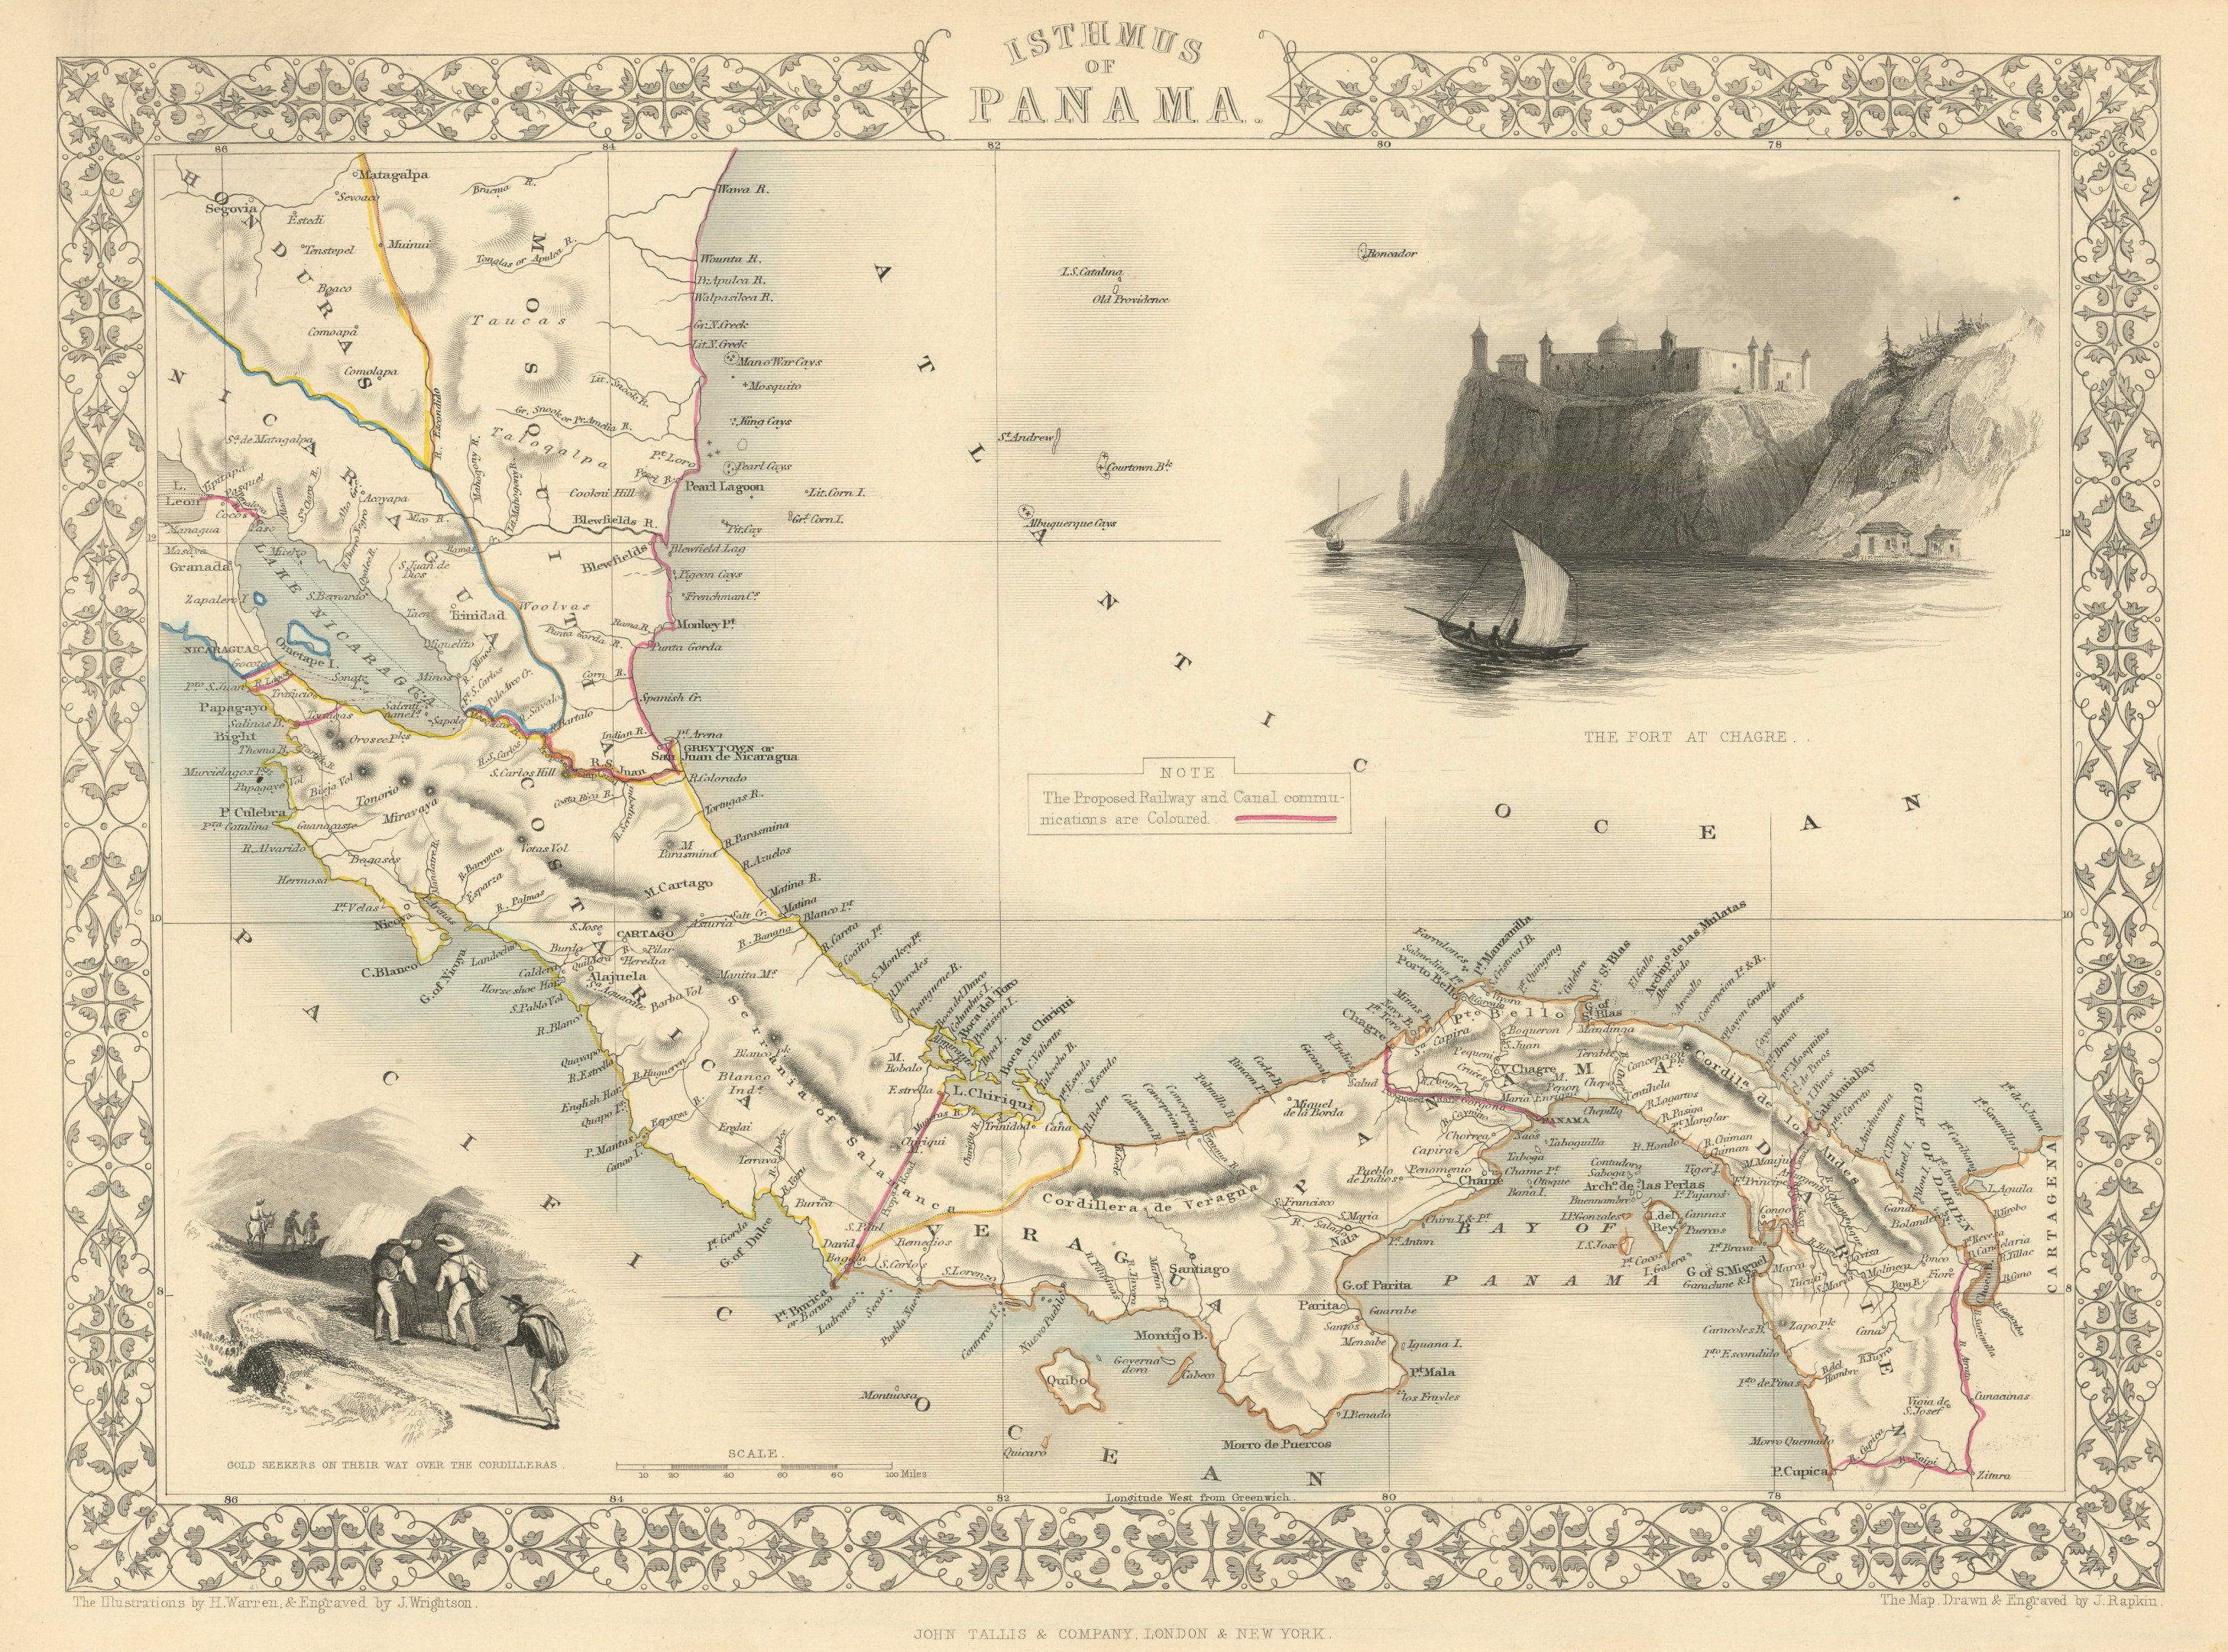 PANAMA ISTHMUS shows 7 proposed canal, rail & road routes RAPKIN/TALLIS 1851 map